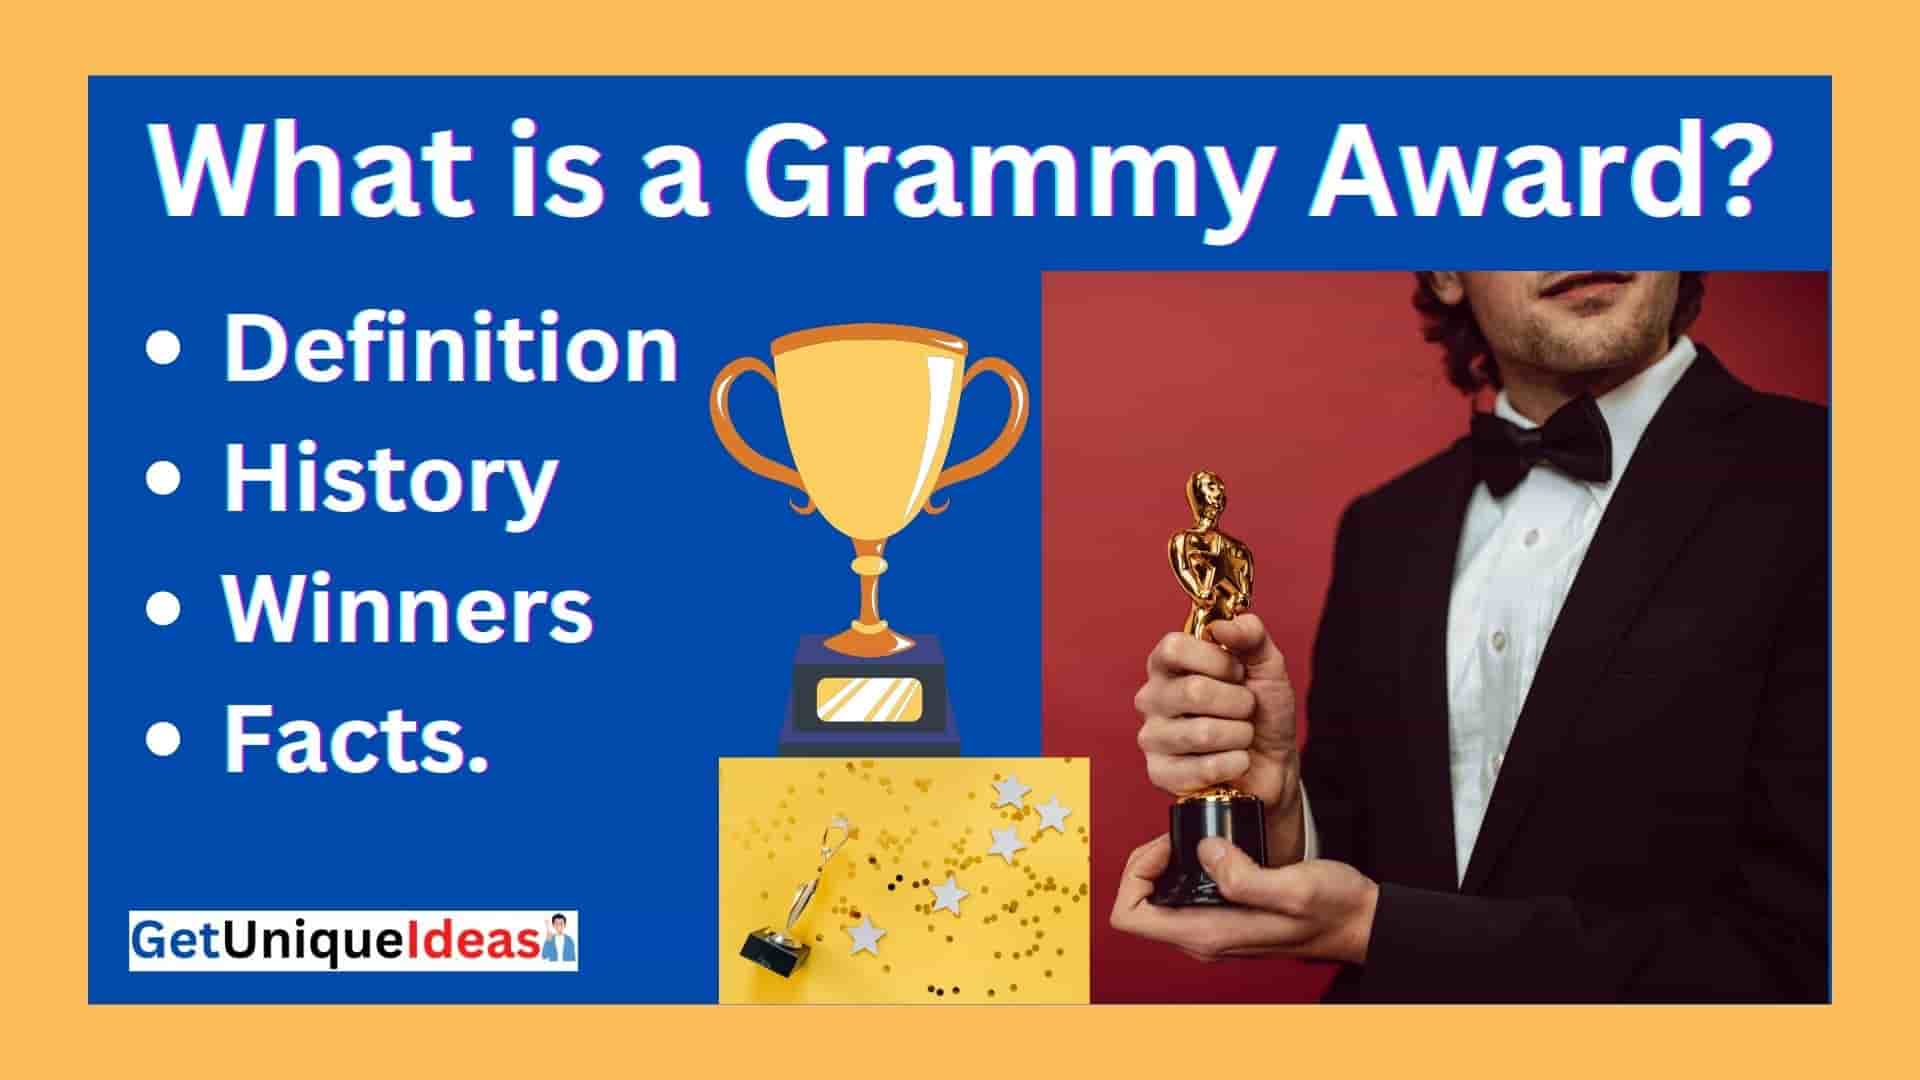 What is a Grammy Award?